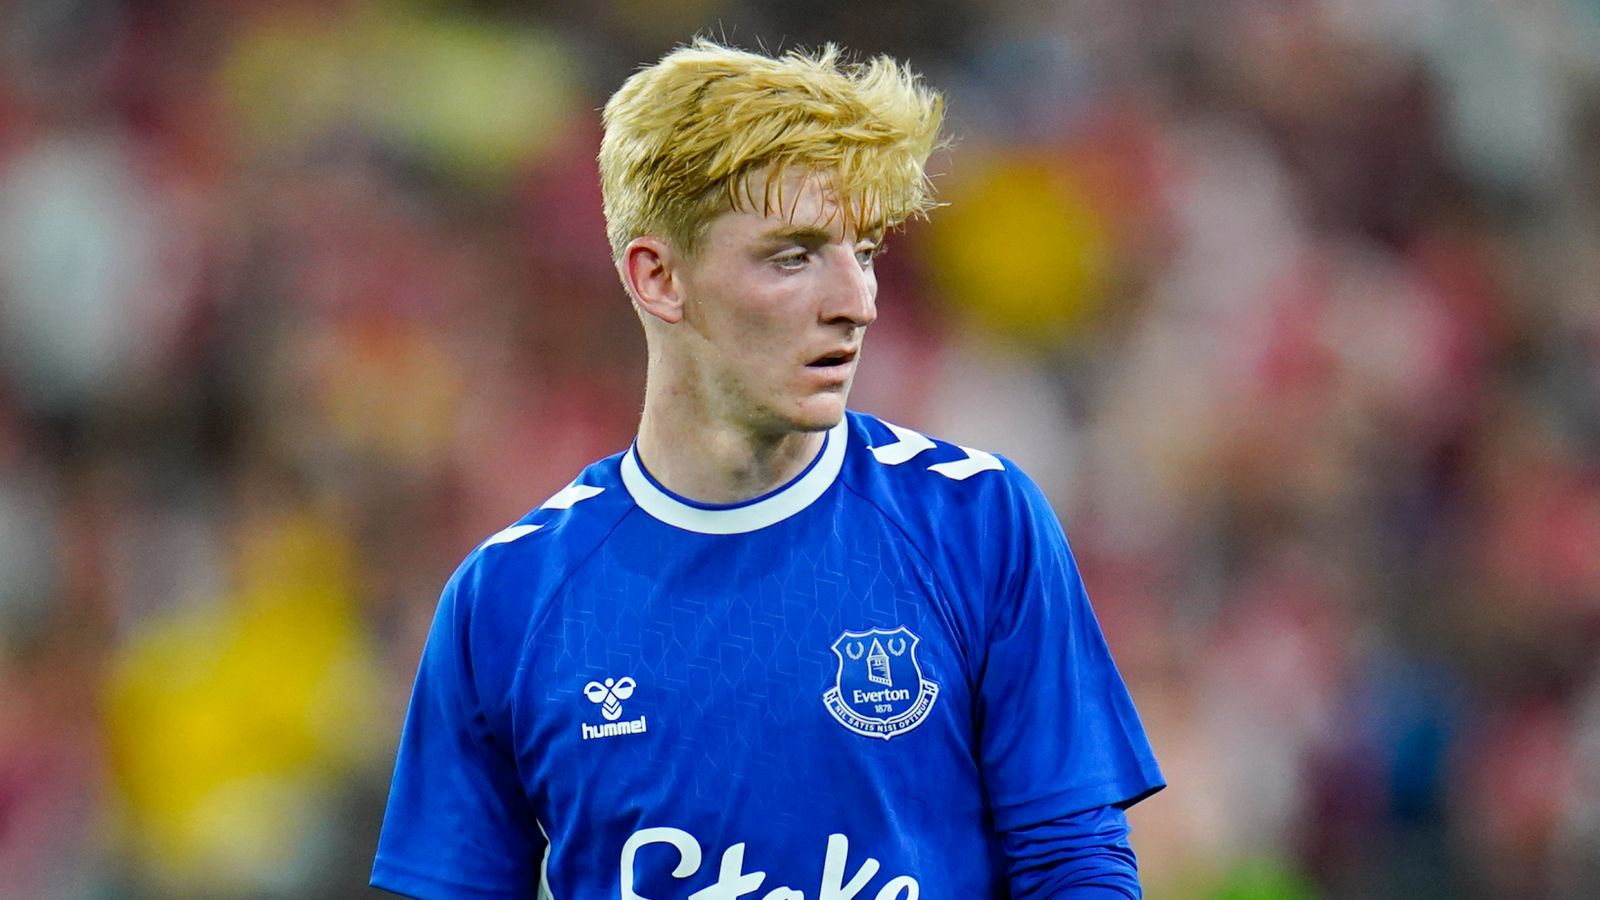 Anthony Gordon: Chelsea interested in signing Everton forward amid reports of £40m bid